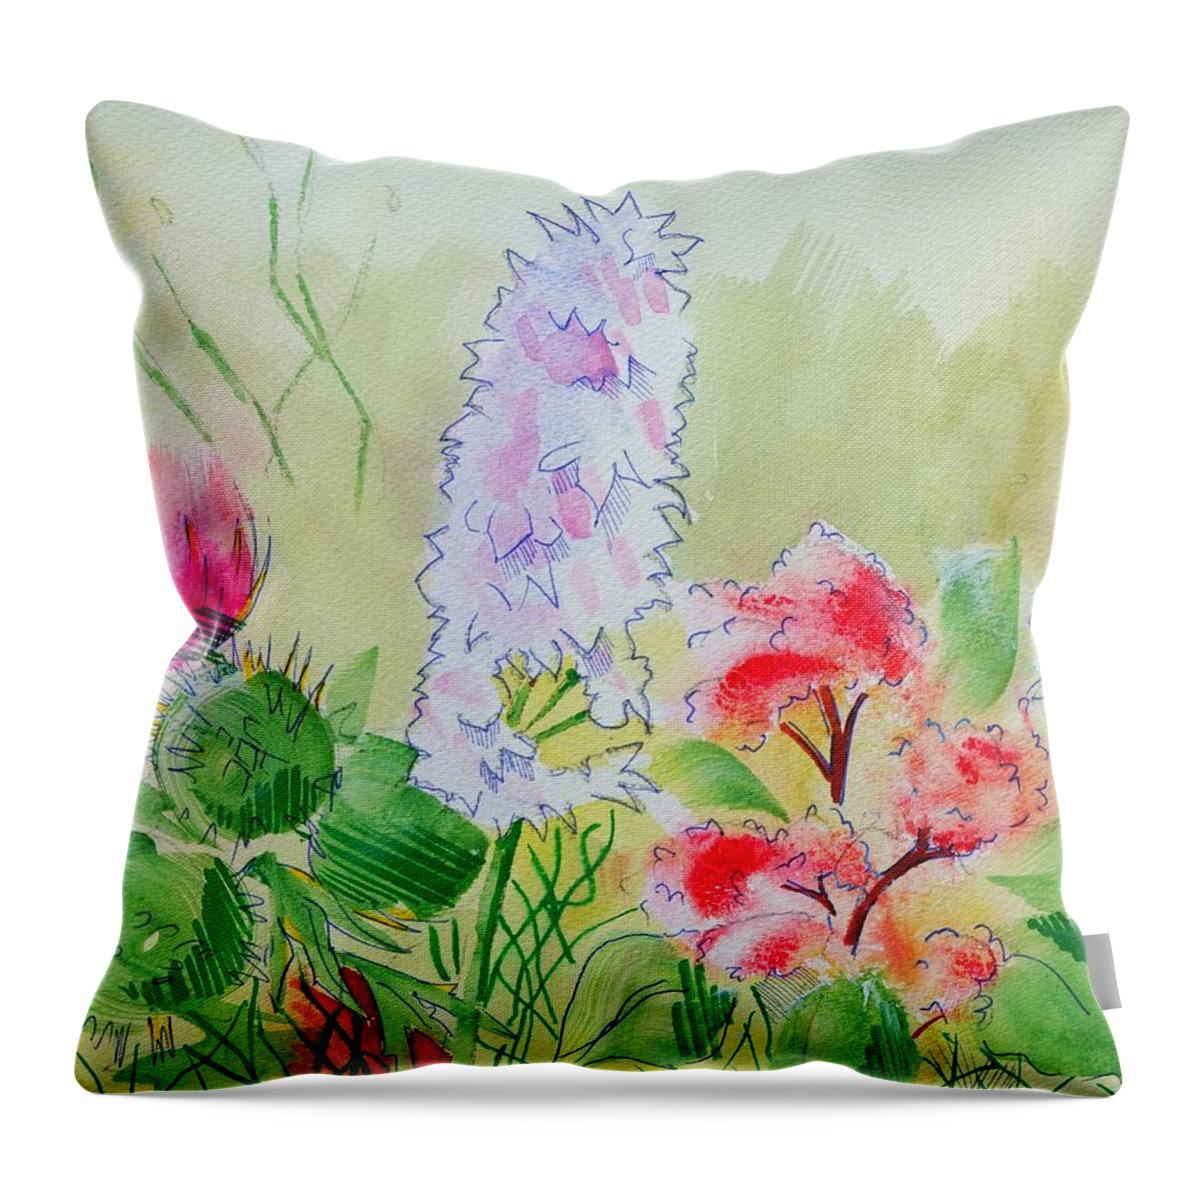 Flowers Throw Pillow featuring the painting British Wild Flowers by Mike Jory